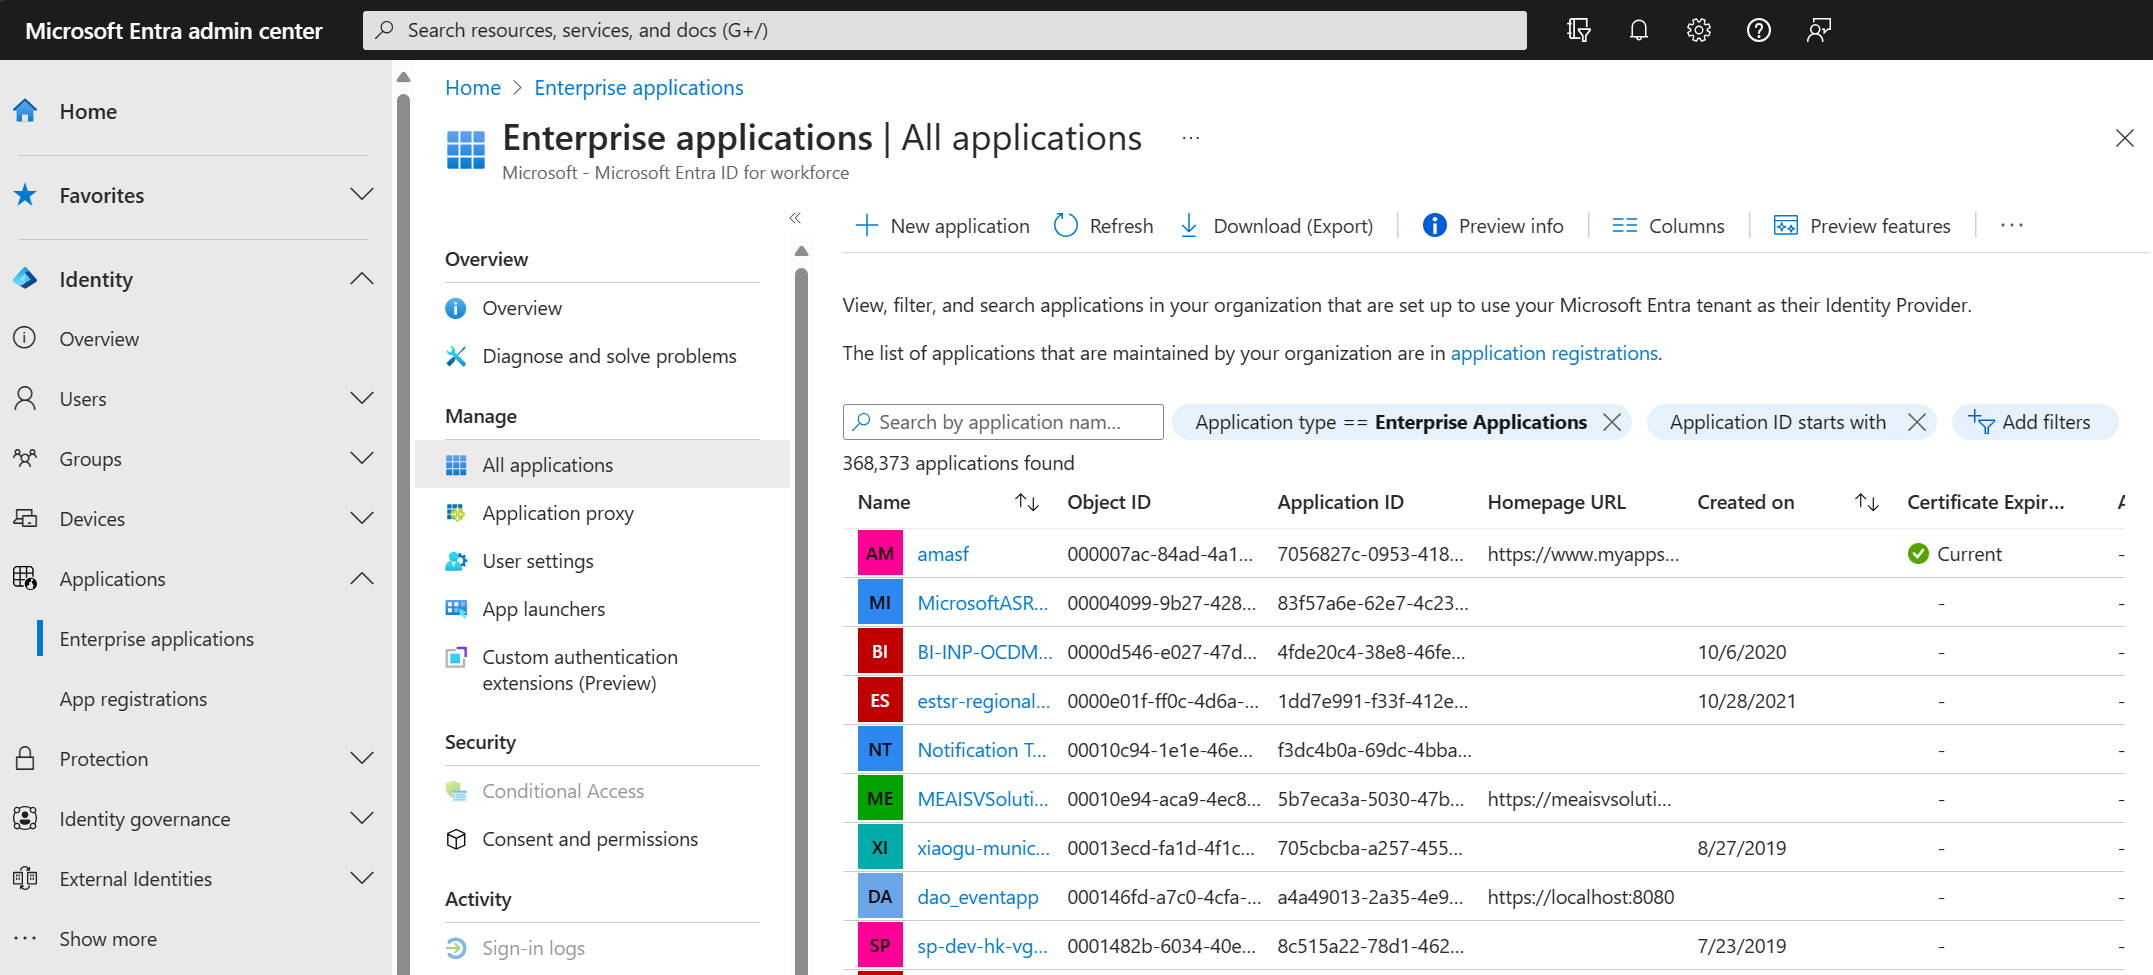 View the registered applications in your Microsoft Entra tenant.